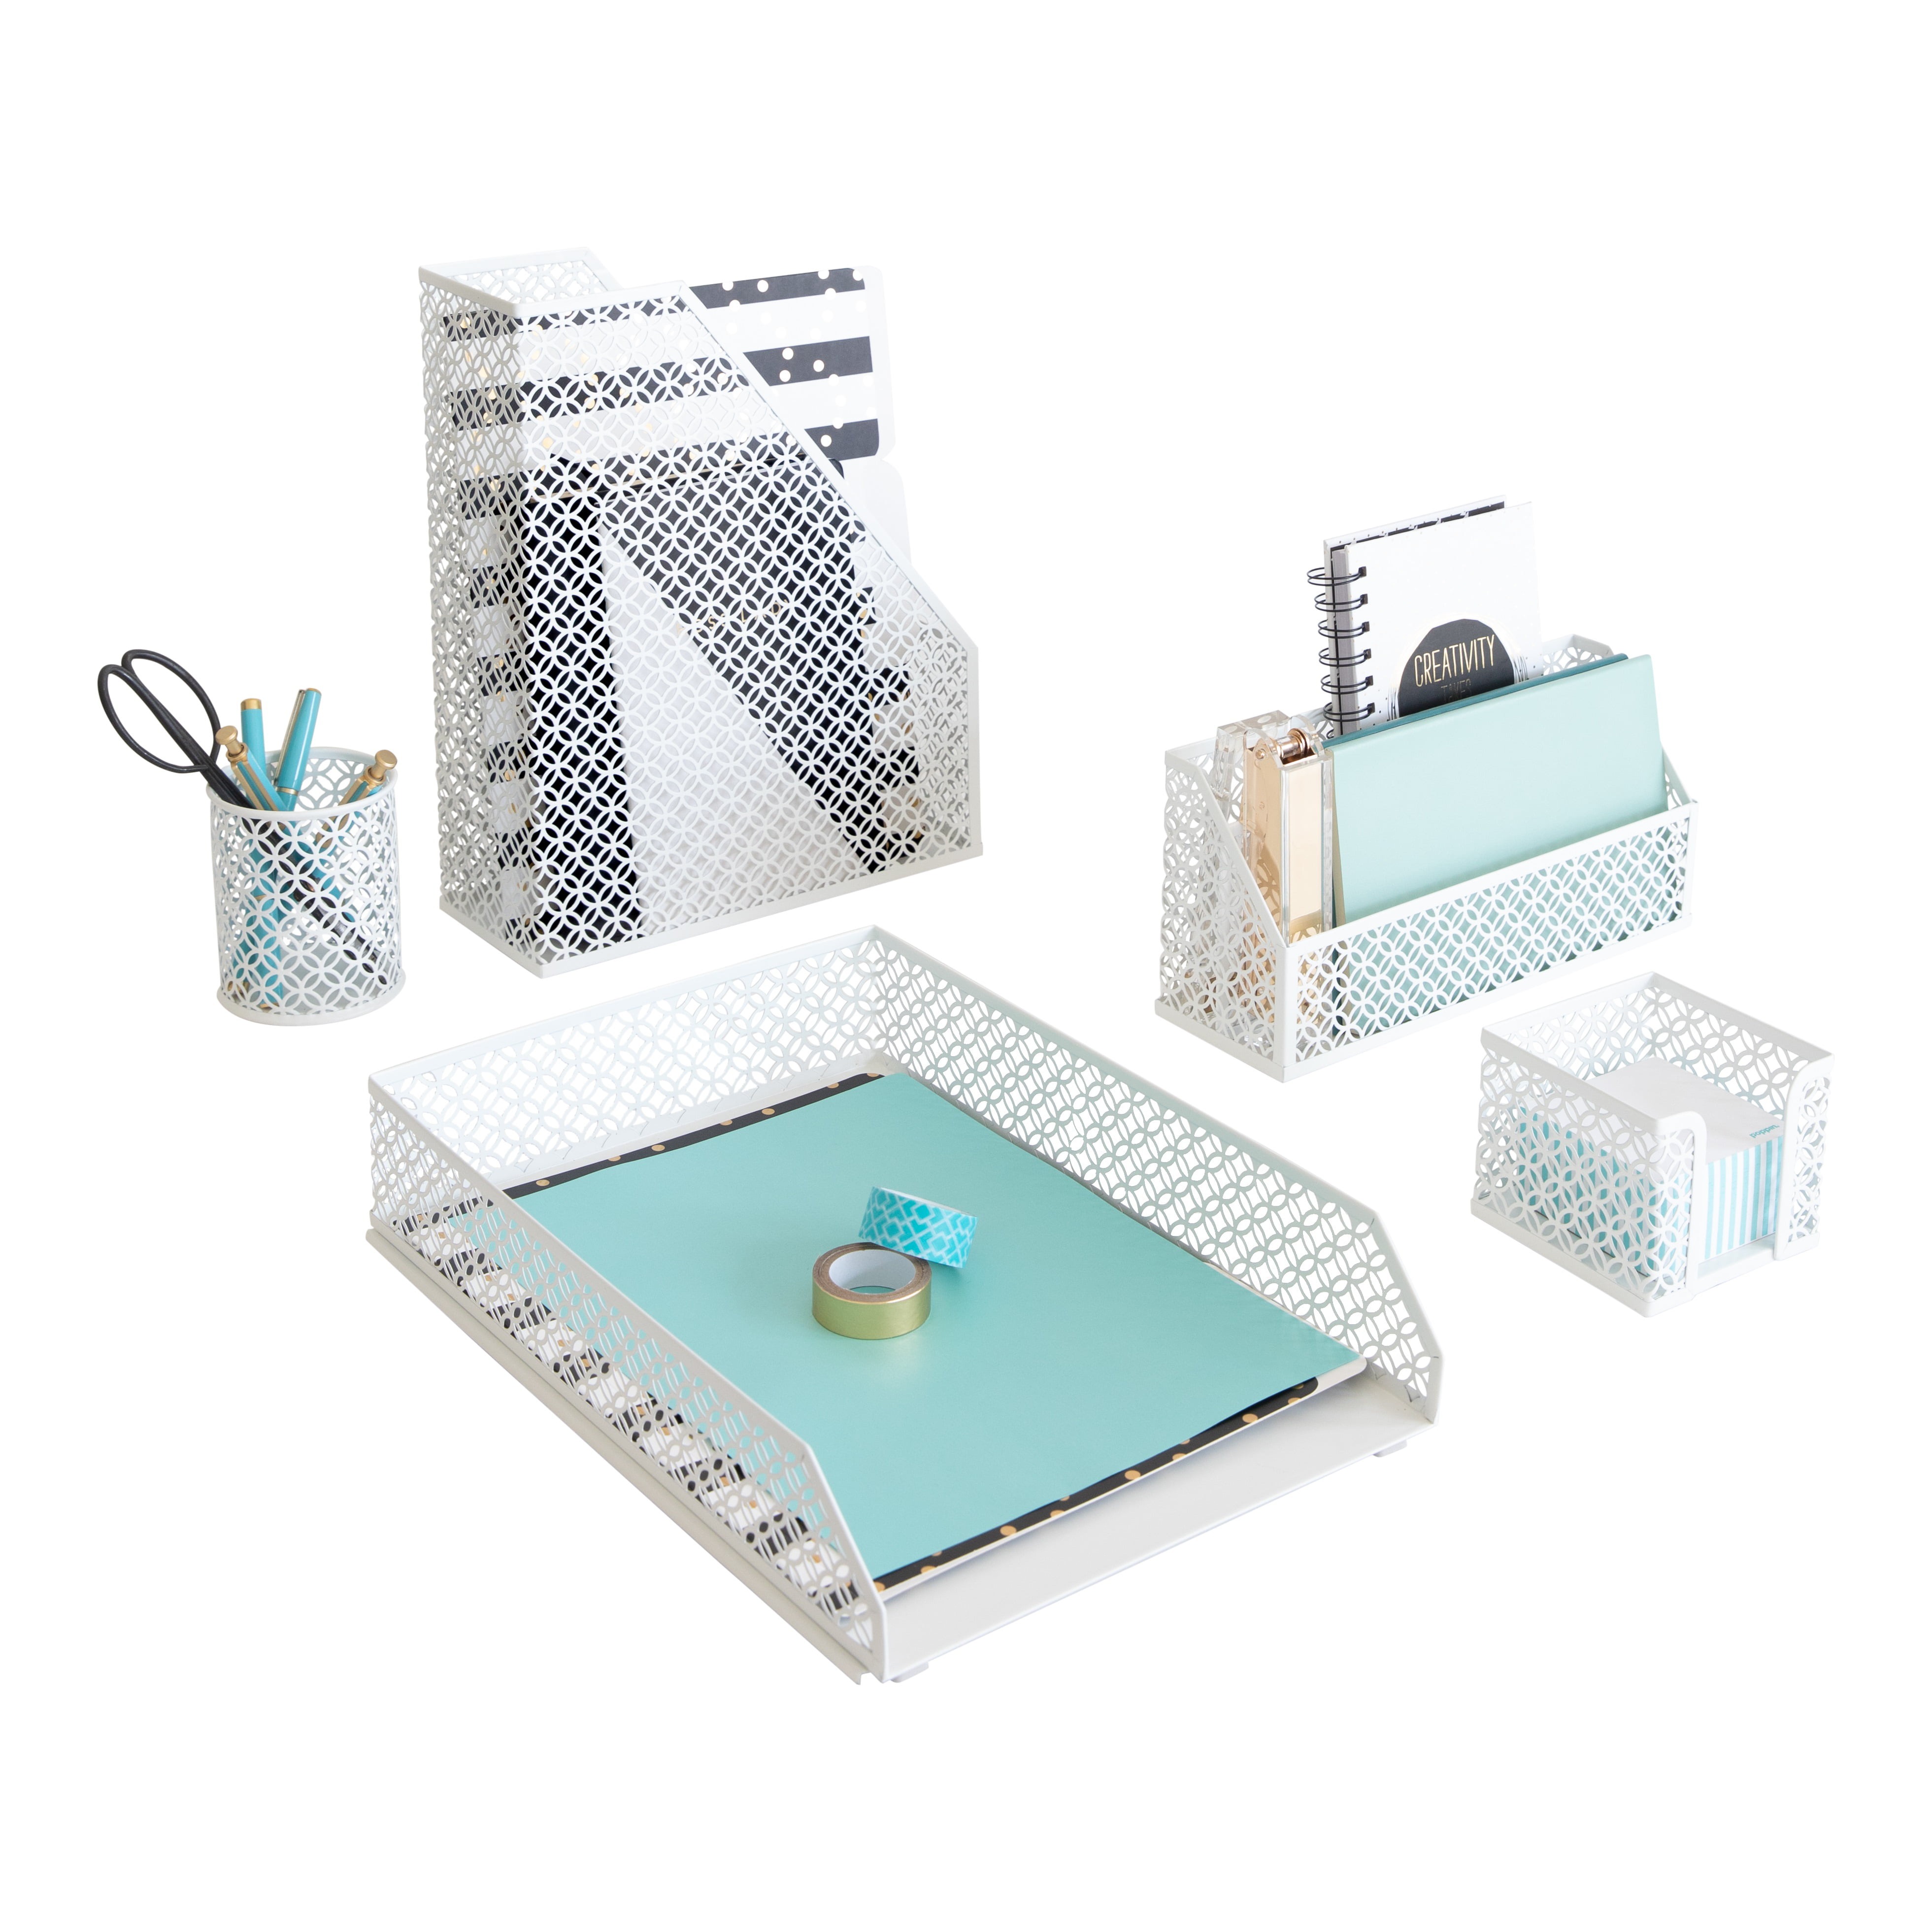 Drawer Blu Monaco Mesh White Metal Desk Organizers and Accessories for Office Supplies 6 Compartments 